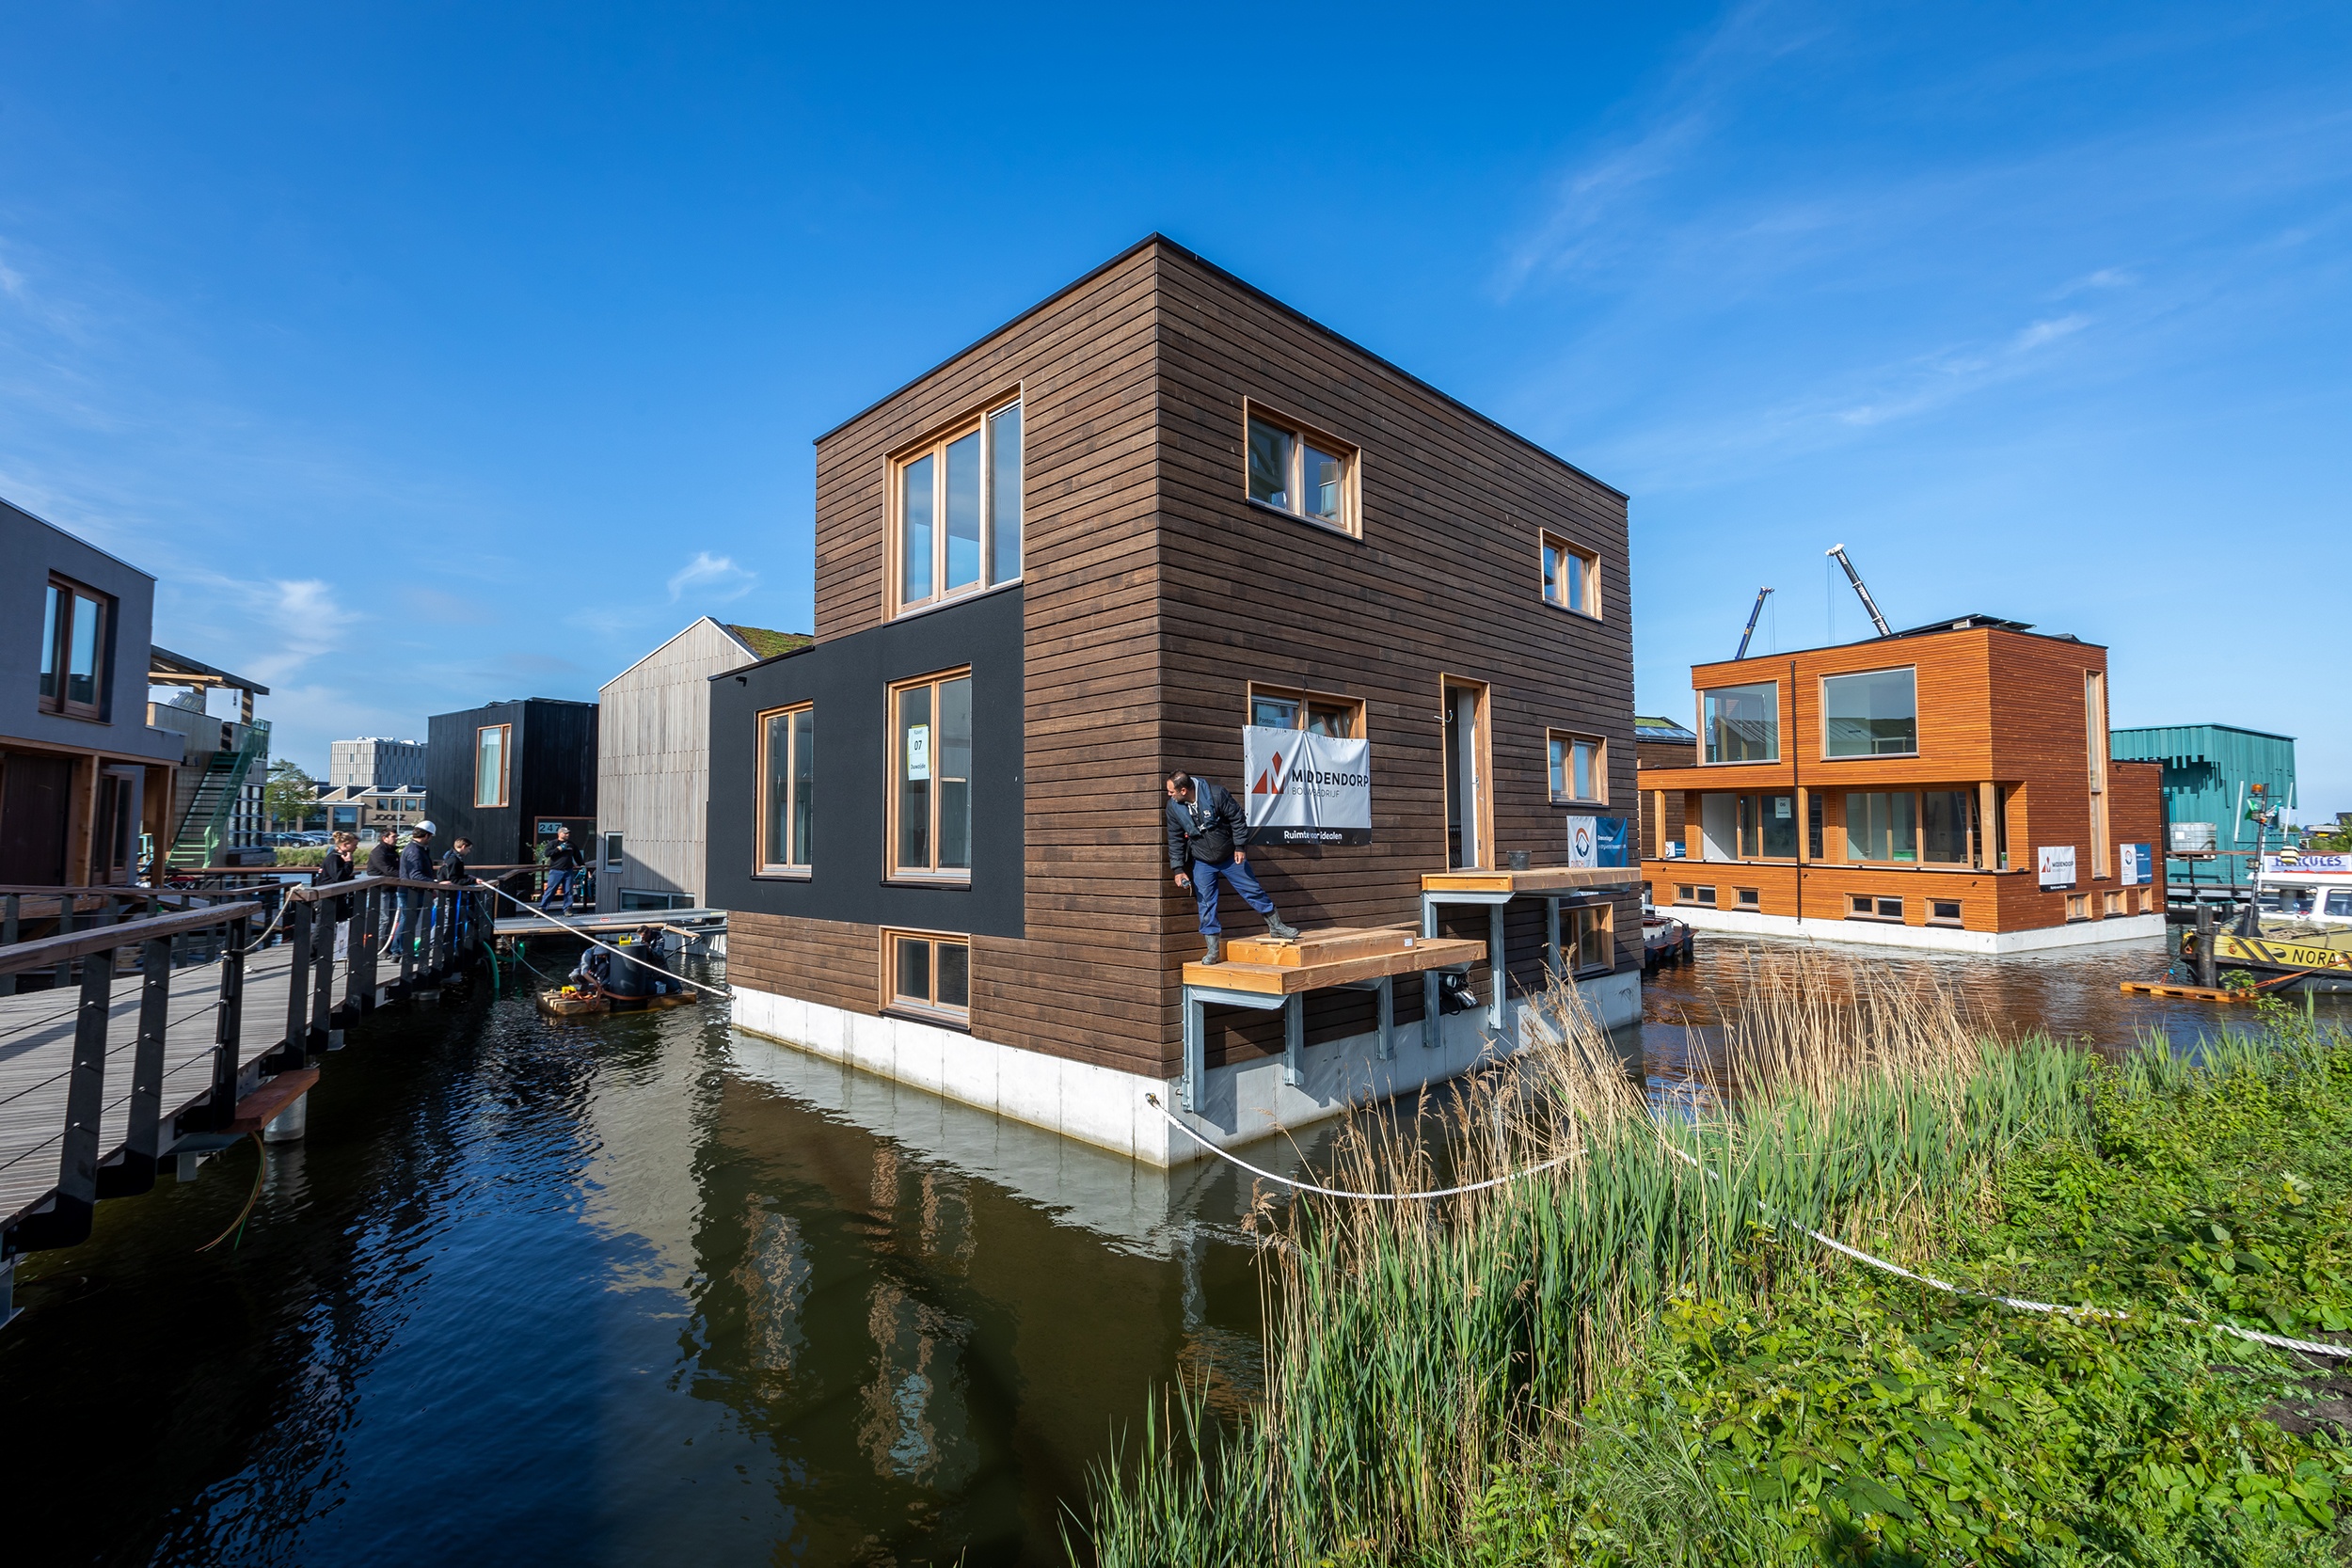 Bamboo X-treme cladding and furniture beams at Schoonschip Amsterdam